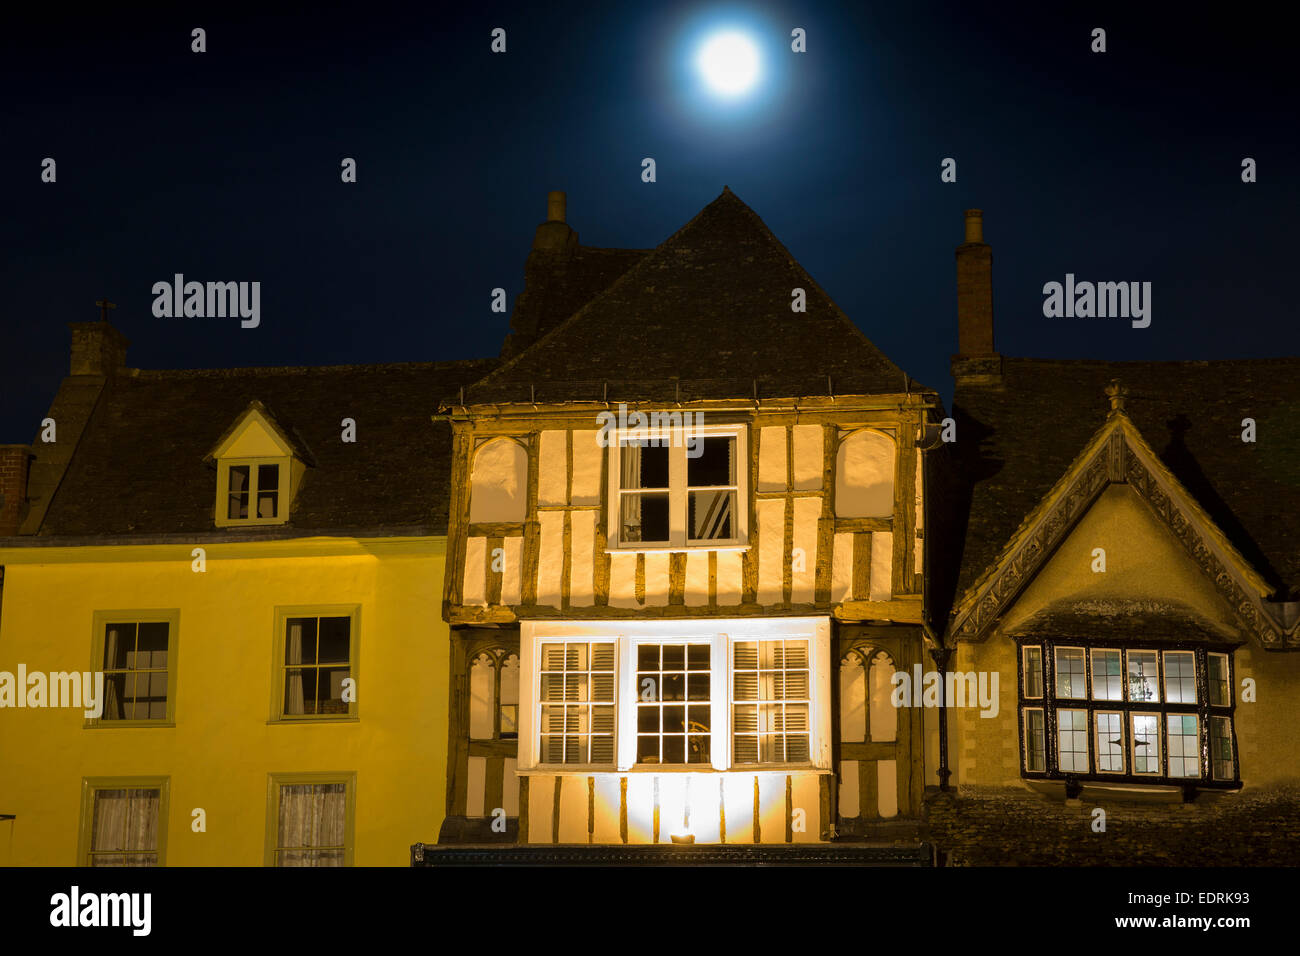 Full moon shining on ancient Medieval architecture along Burford High Street at night, The Cotswolds Stock Photo